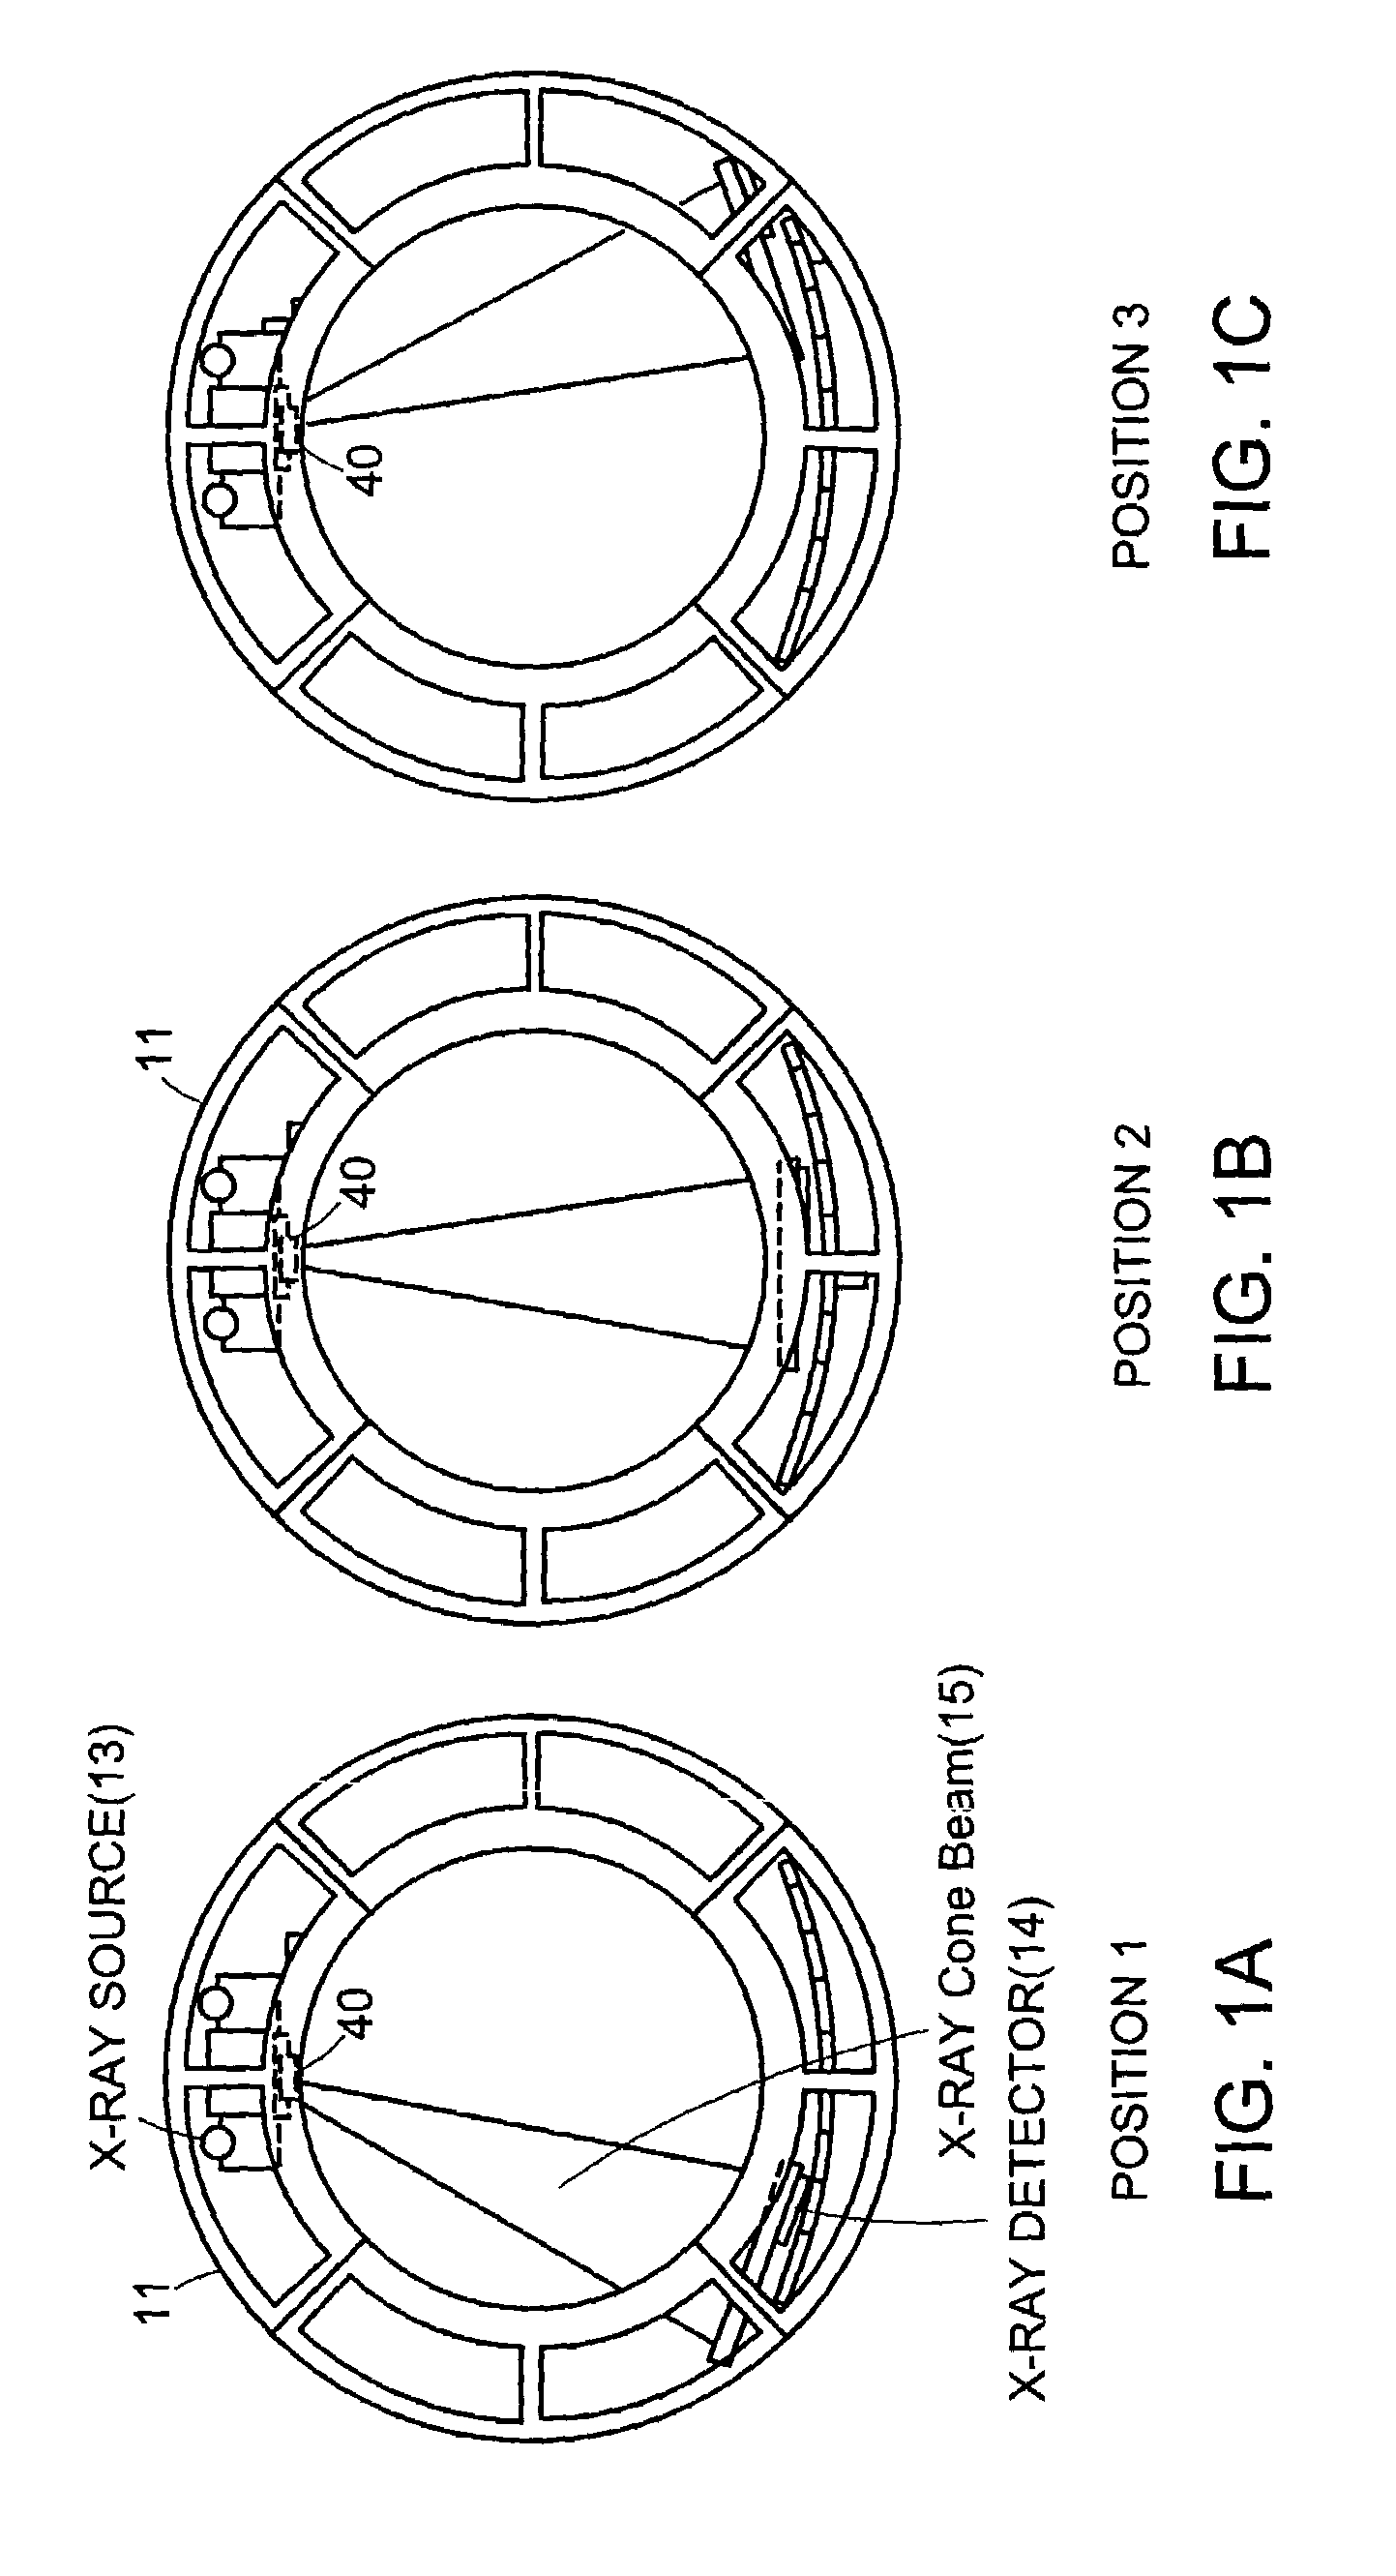 Systems and methods for imaging large field-of-view objects